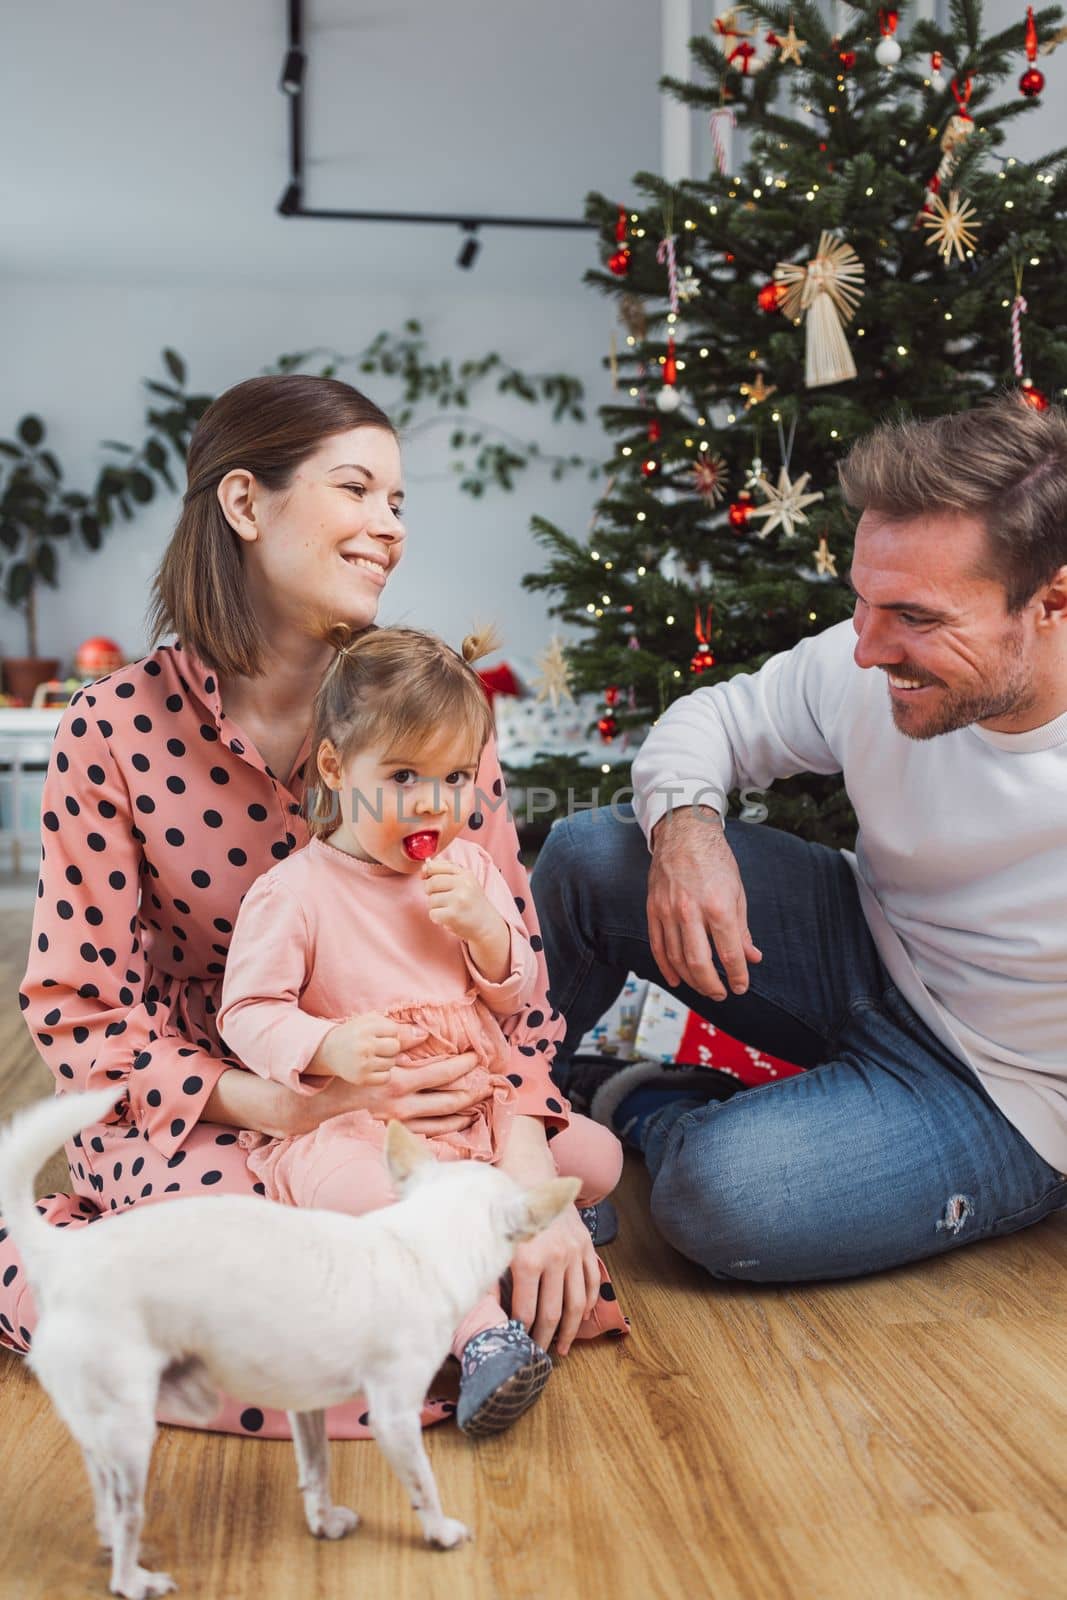 Cheerful smiling family with young baby girl and a dog having fun on Christmas day by VisualProductions